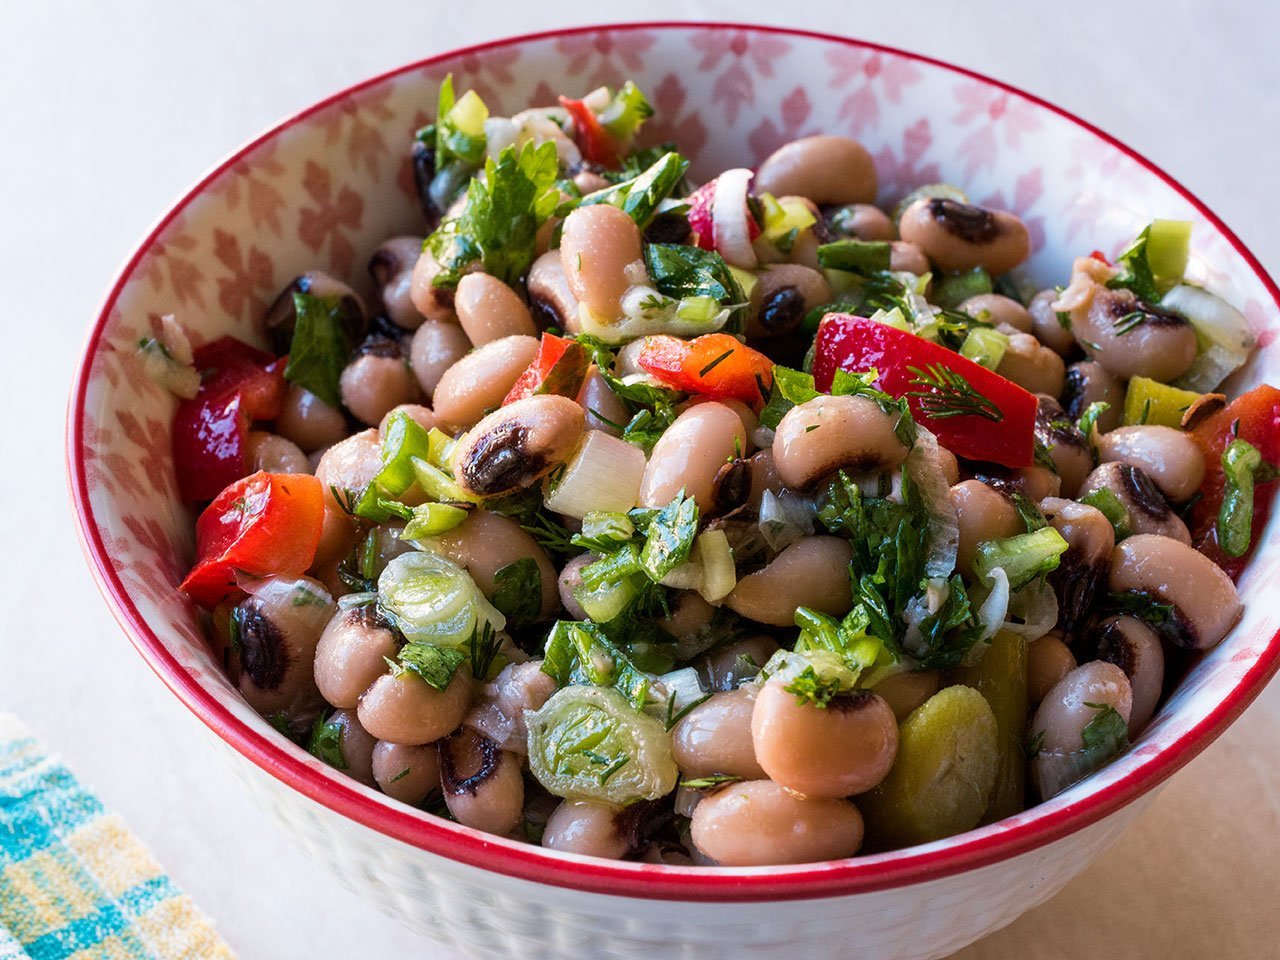 Kidney Bean Salad With Tomatoes, Parsley And Dill / Borulce Sala